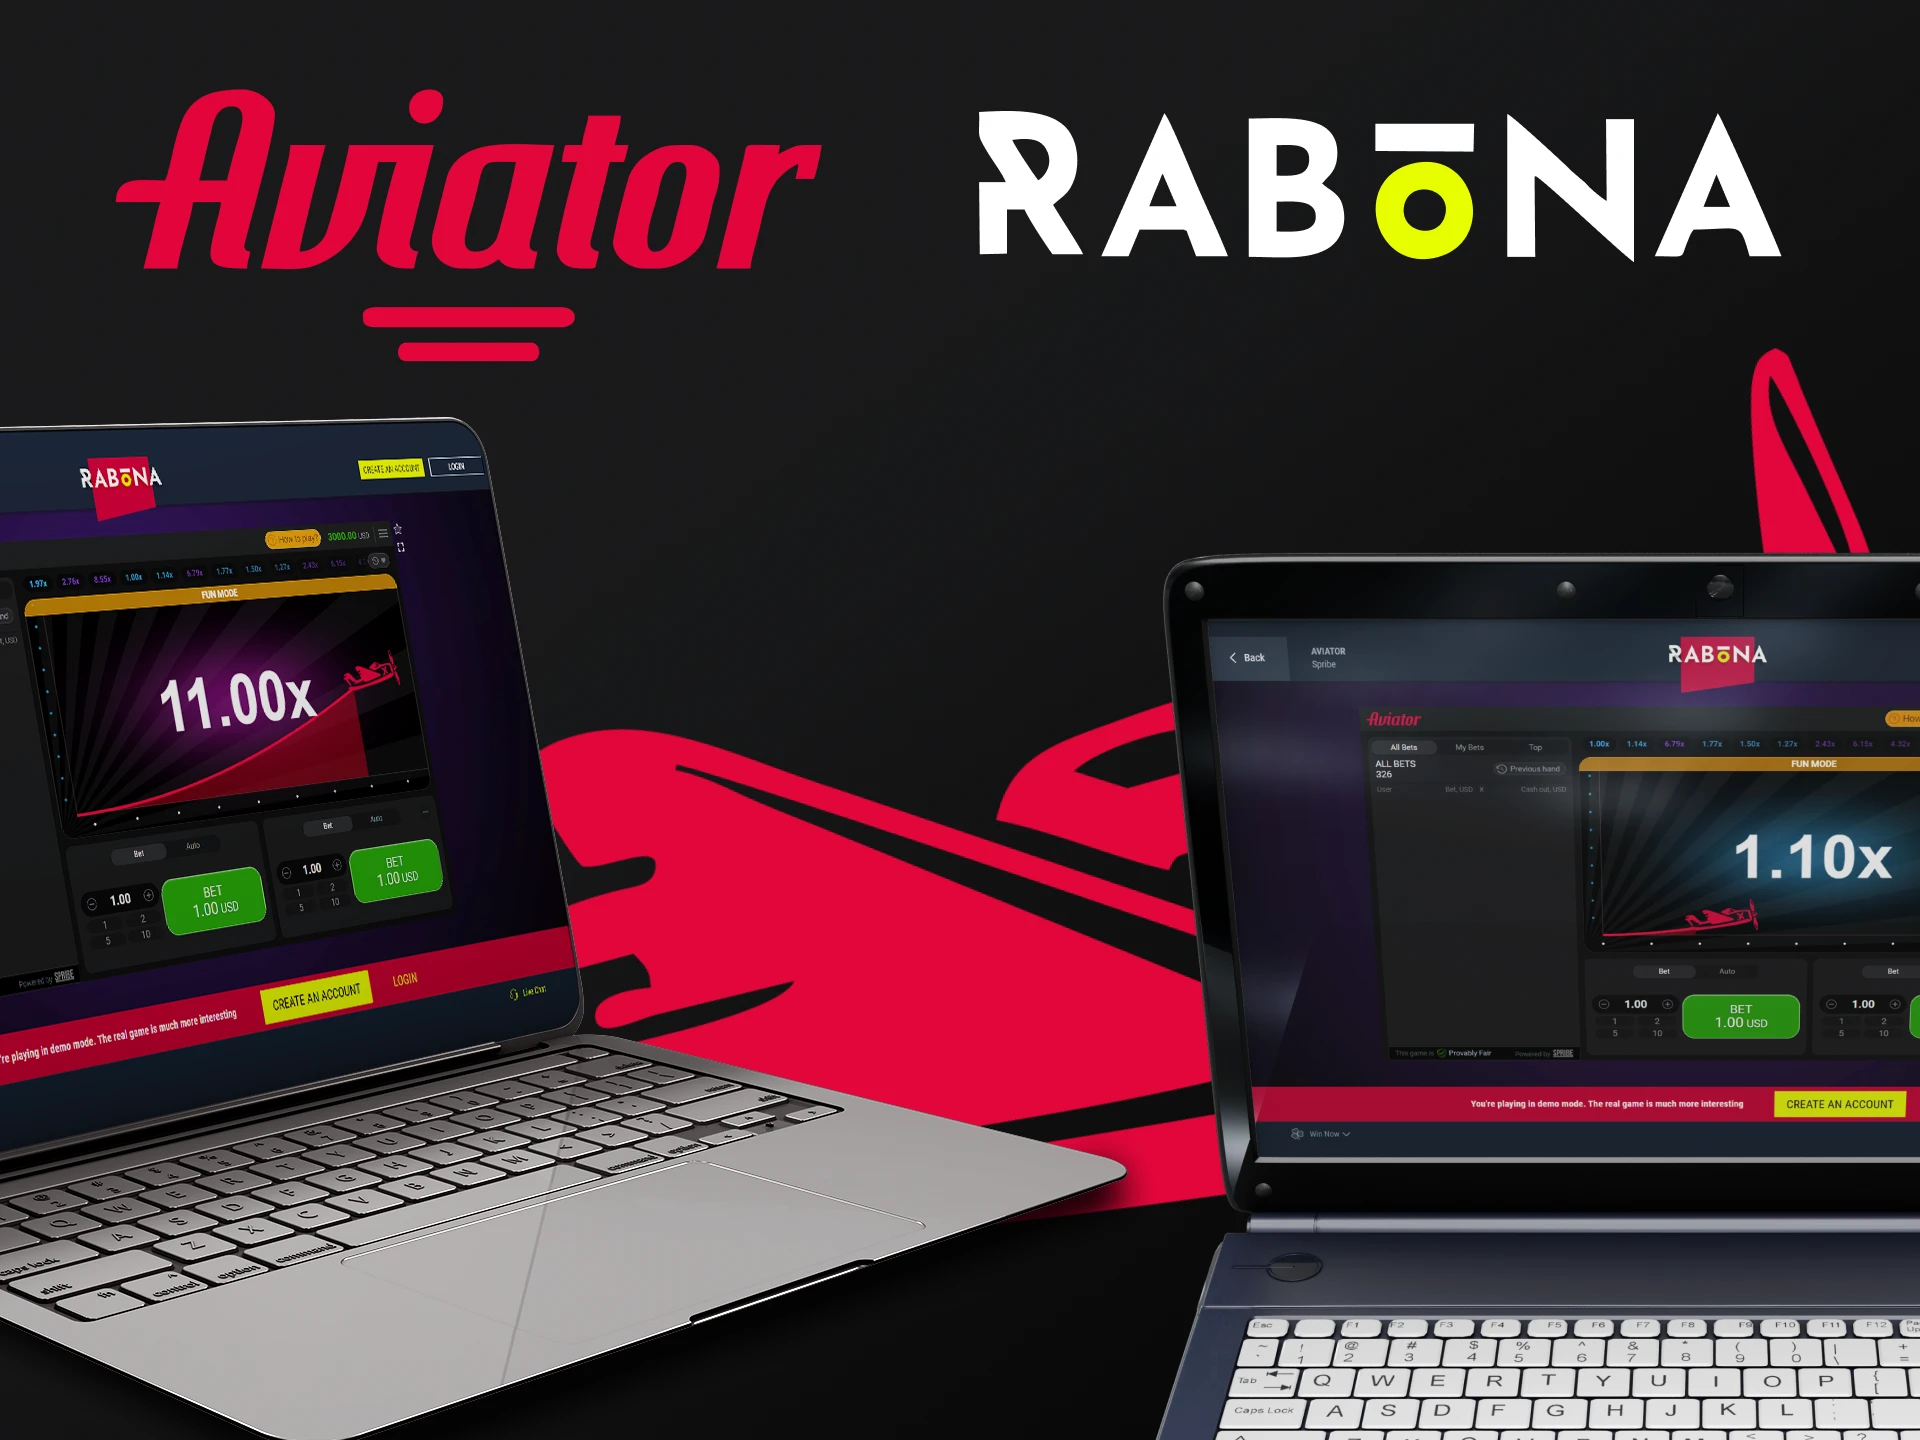 Choose a device to play Aviator on the Rabona website.